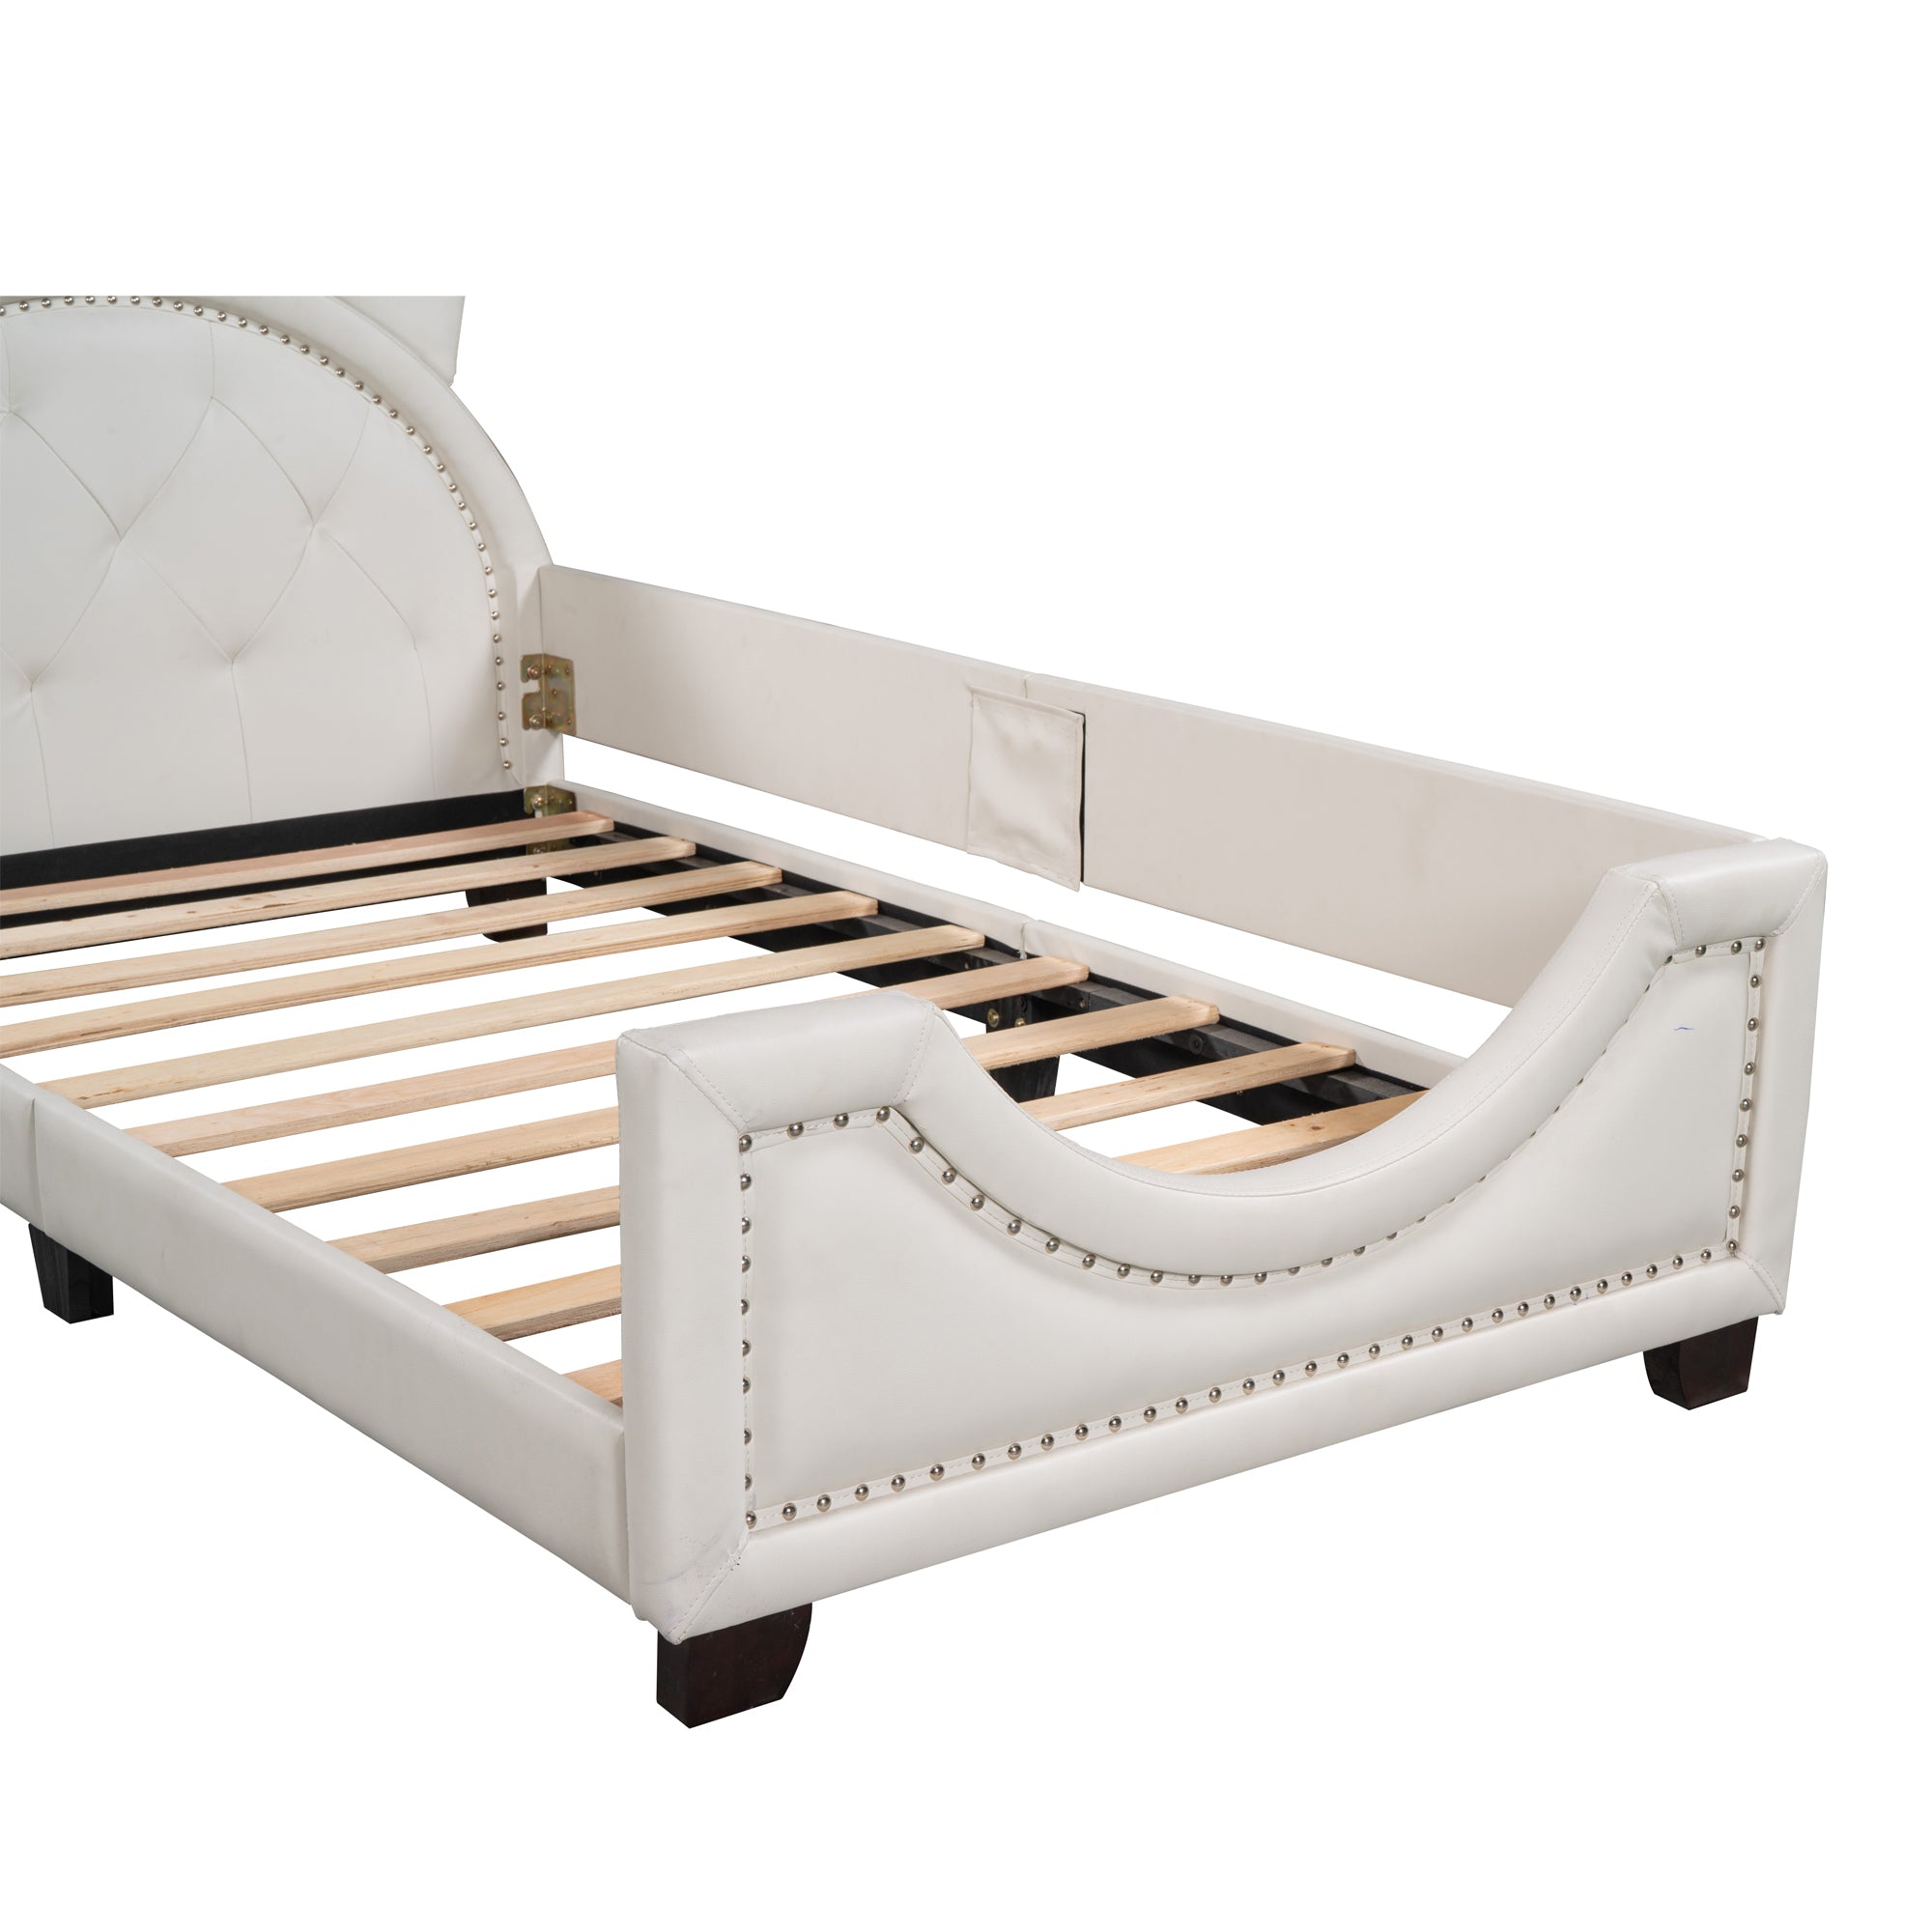 Twin Size Upholstered Daybed with Carton Ears Shaped white-pu leather